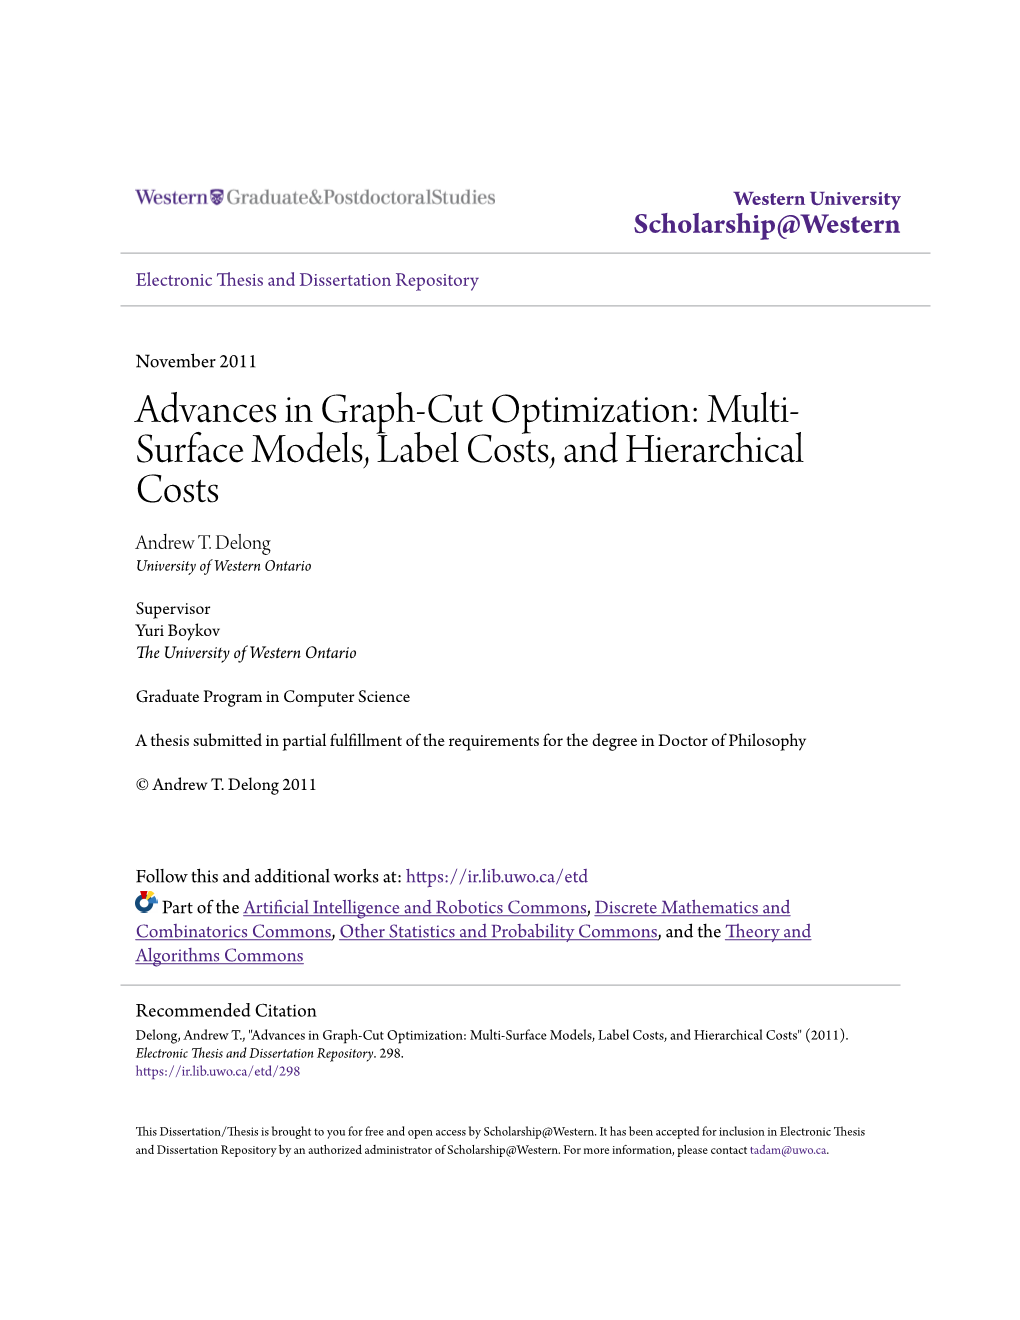 Advances in Graph-Cut Optimization: Multi-Surface Models, Label Costs, and Hierarchical Costs" (2011)